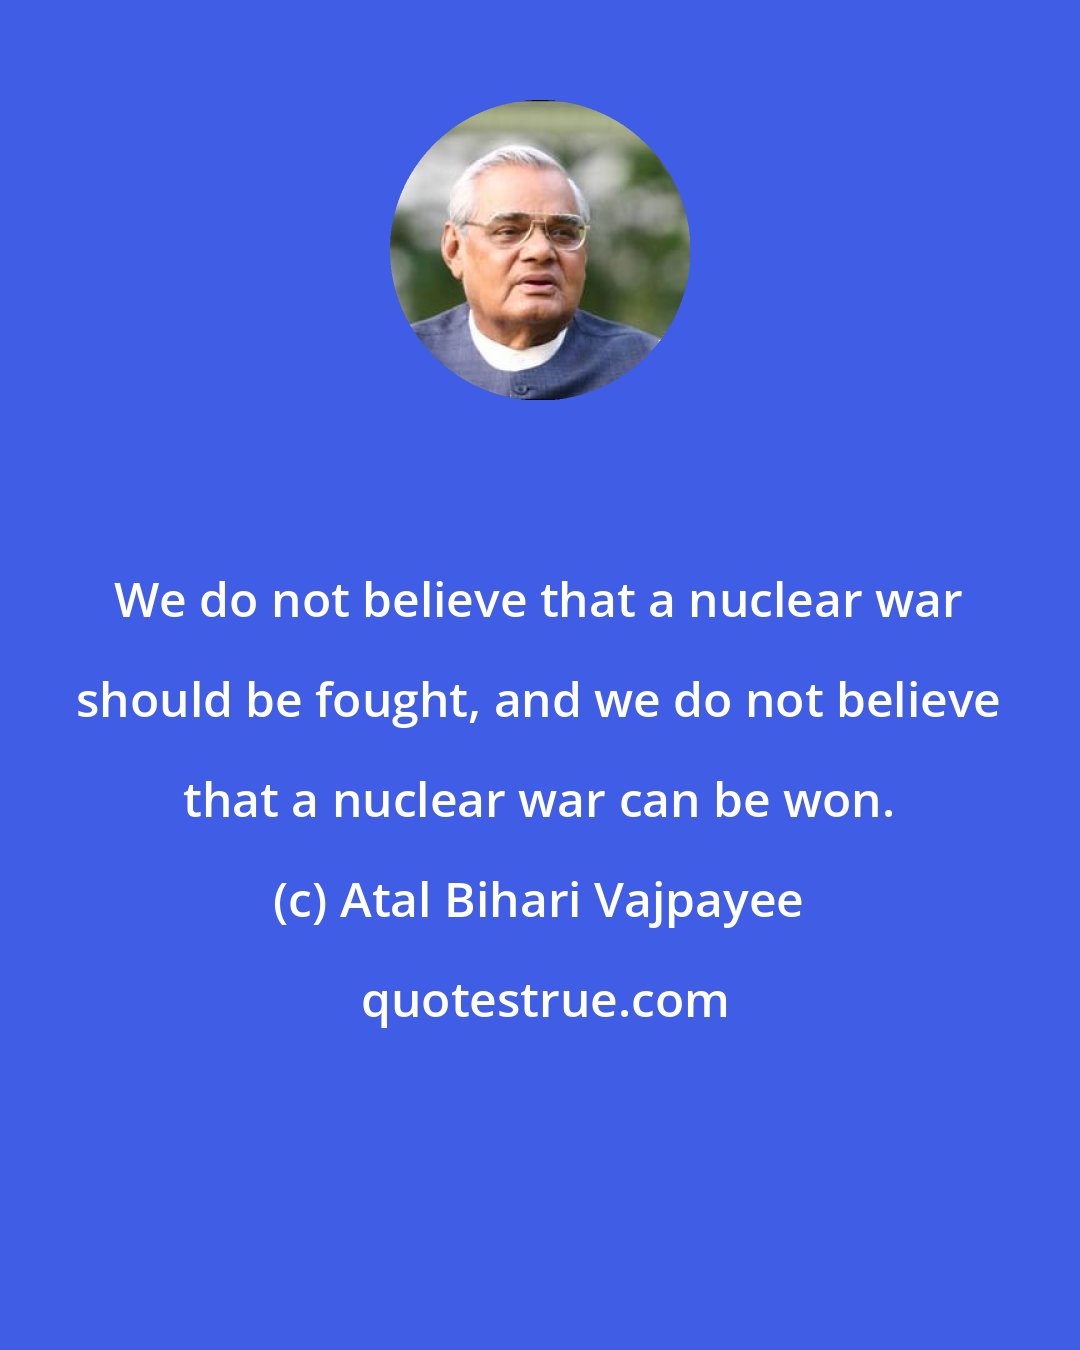 Atal Bihari Vajpayee: We do not believe that a nuclear war should be fought, and we do not believe that a nuclear war can be won.